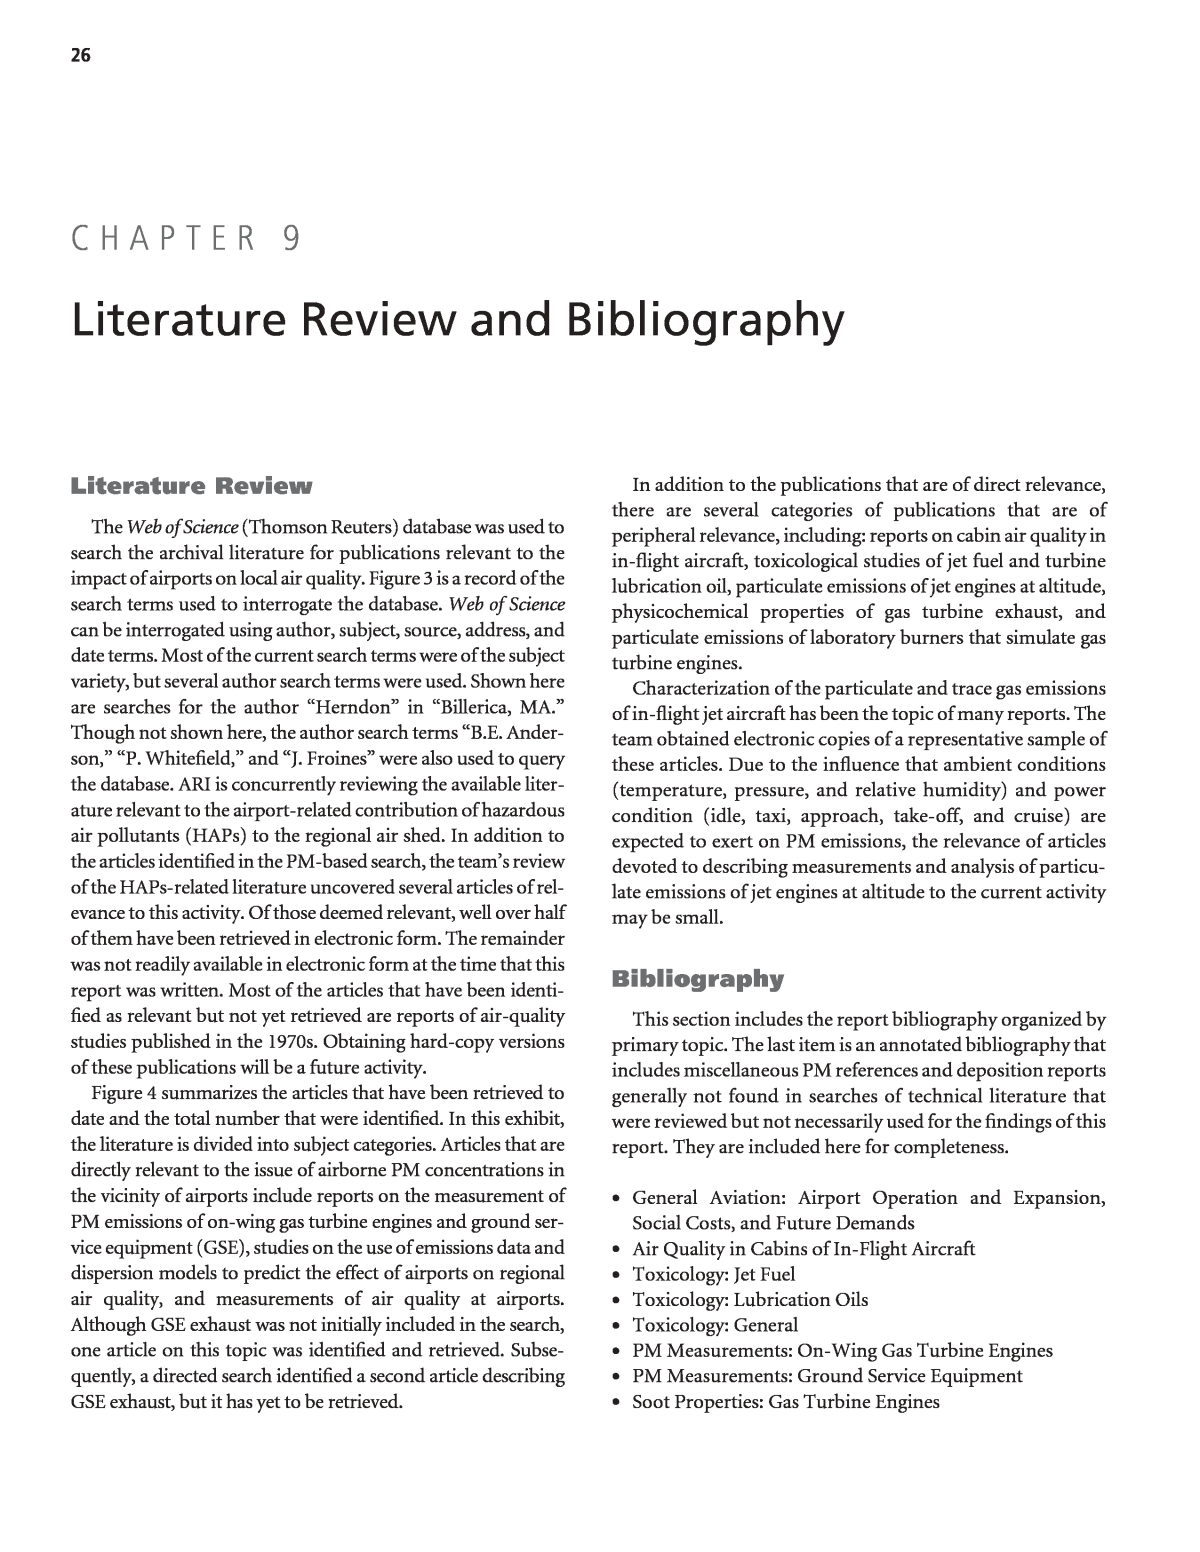 literature review and bibliography